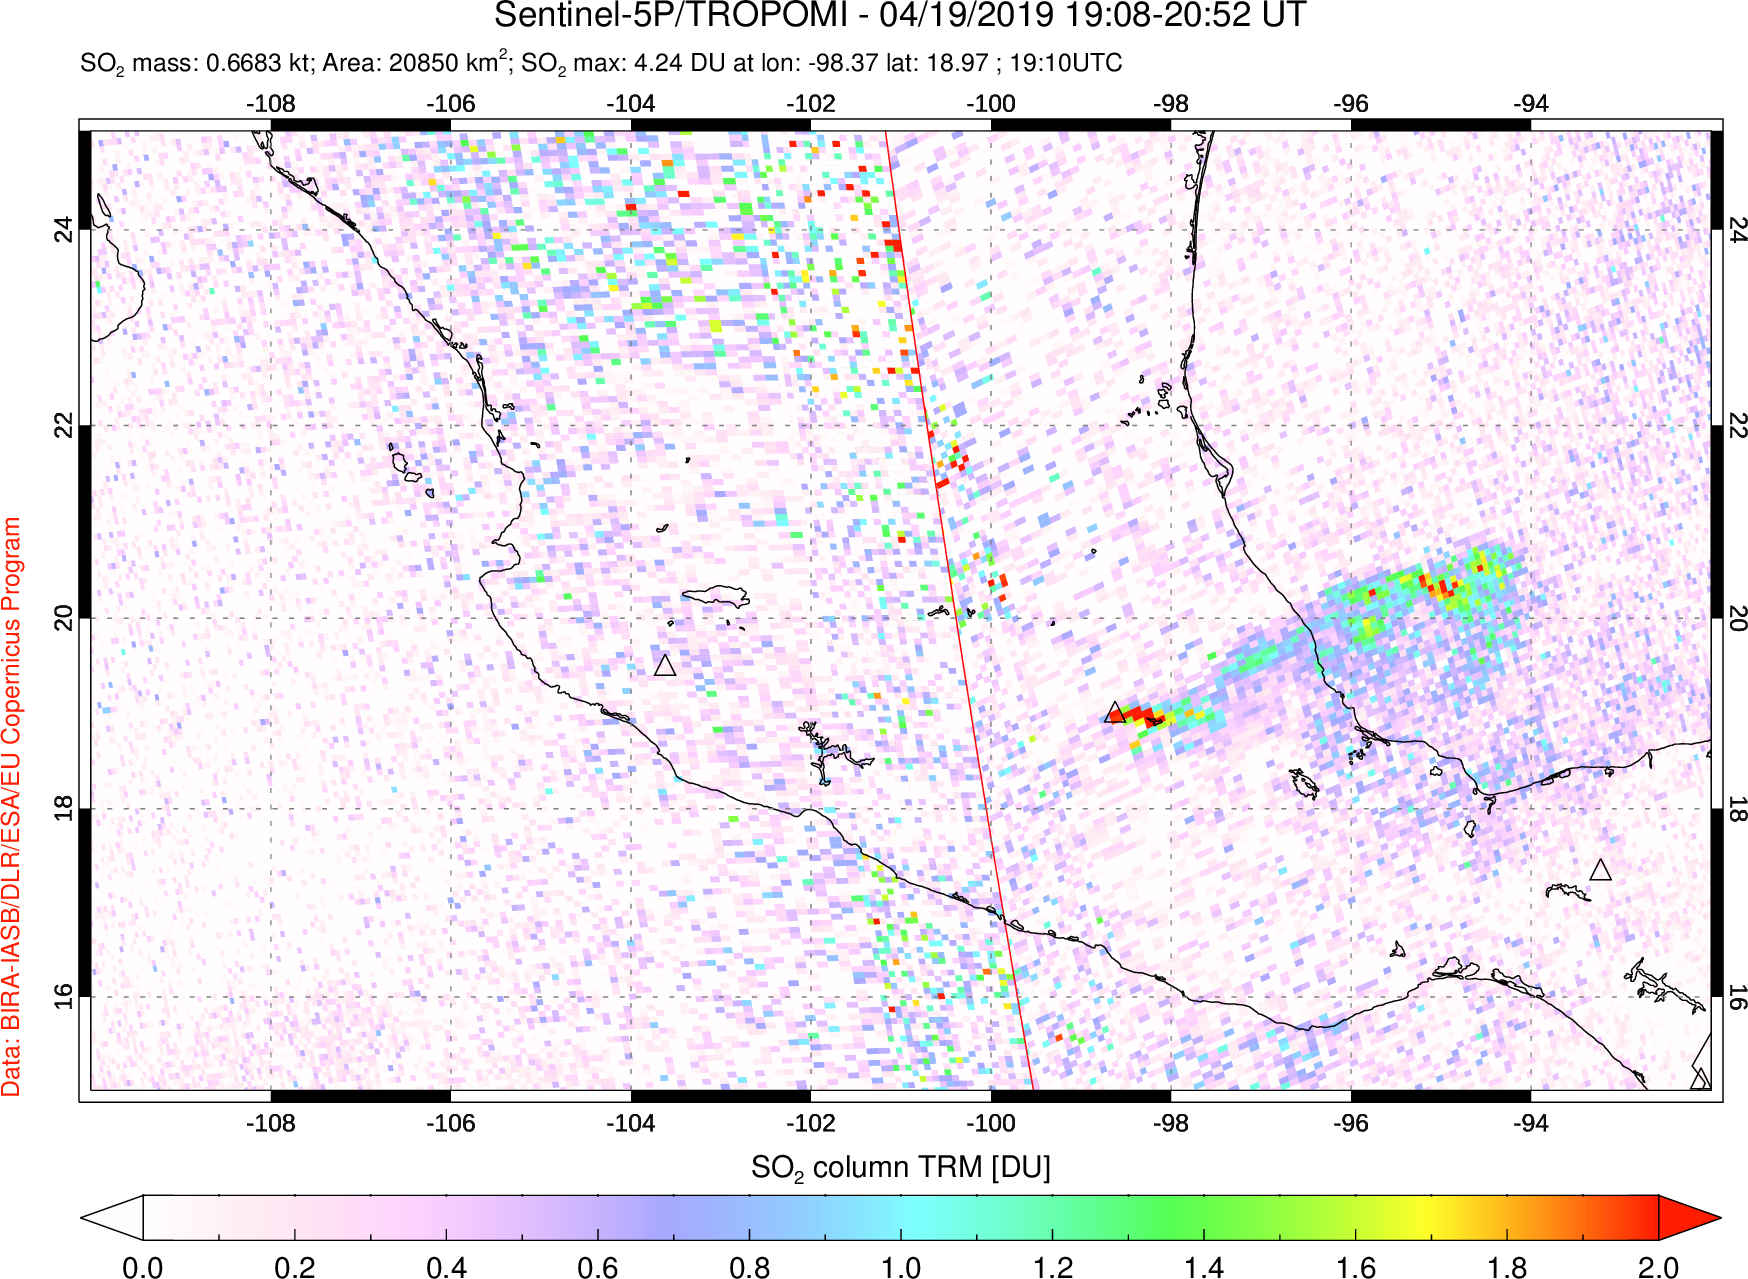 A sulfur dioxide image over Mexico on Apr 19, 2019.